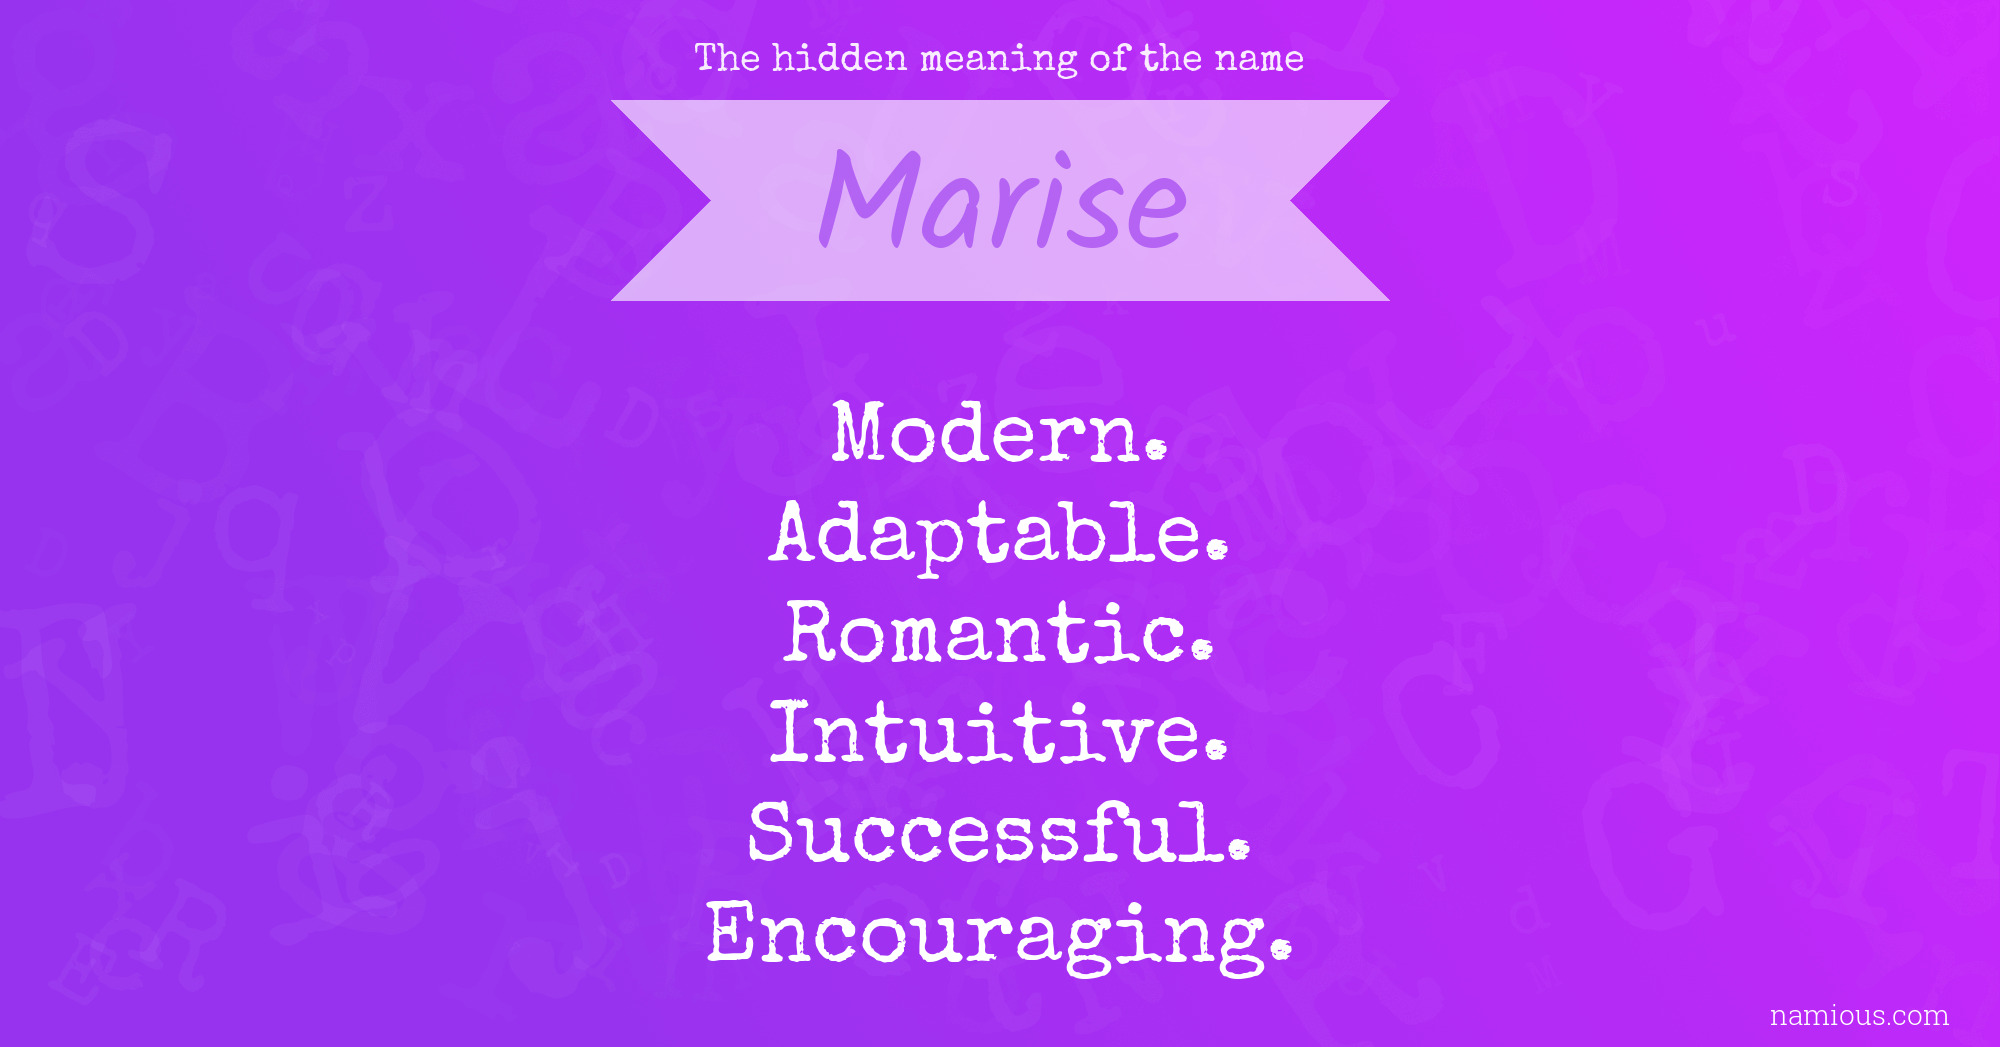 The hidden meaning of the name Marise